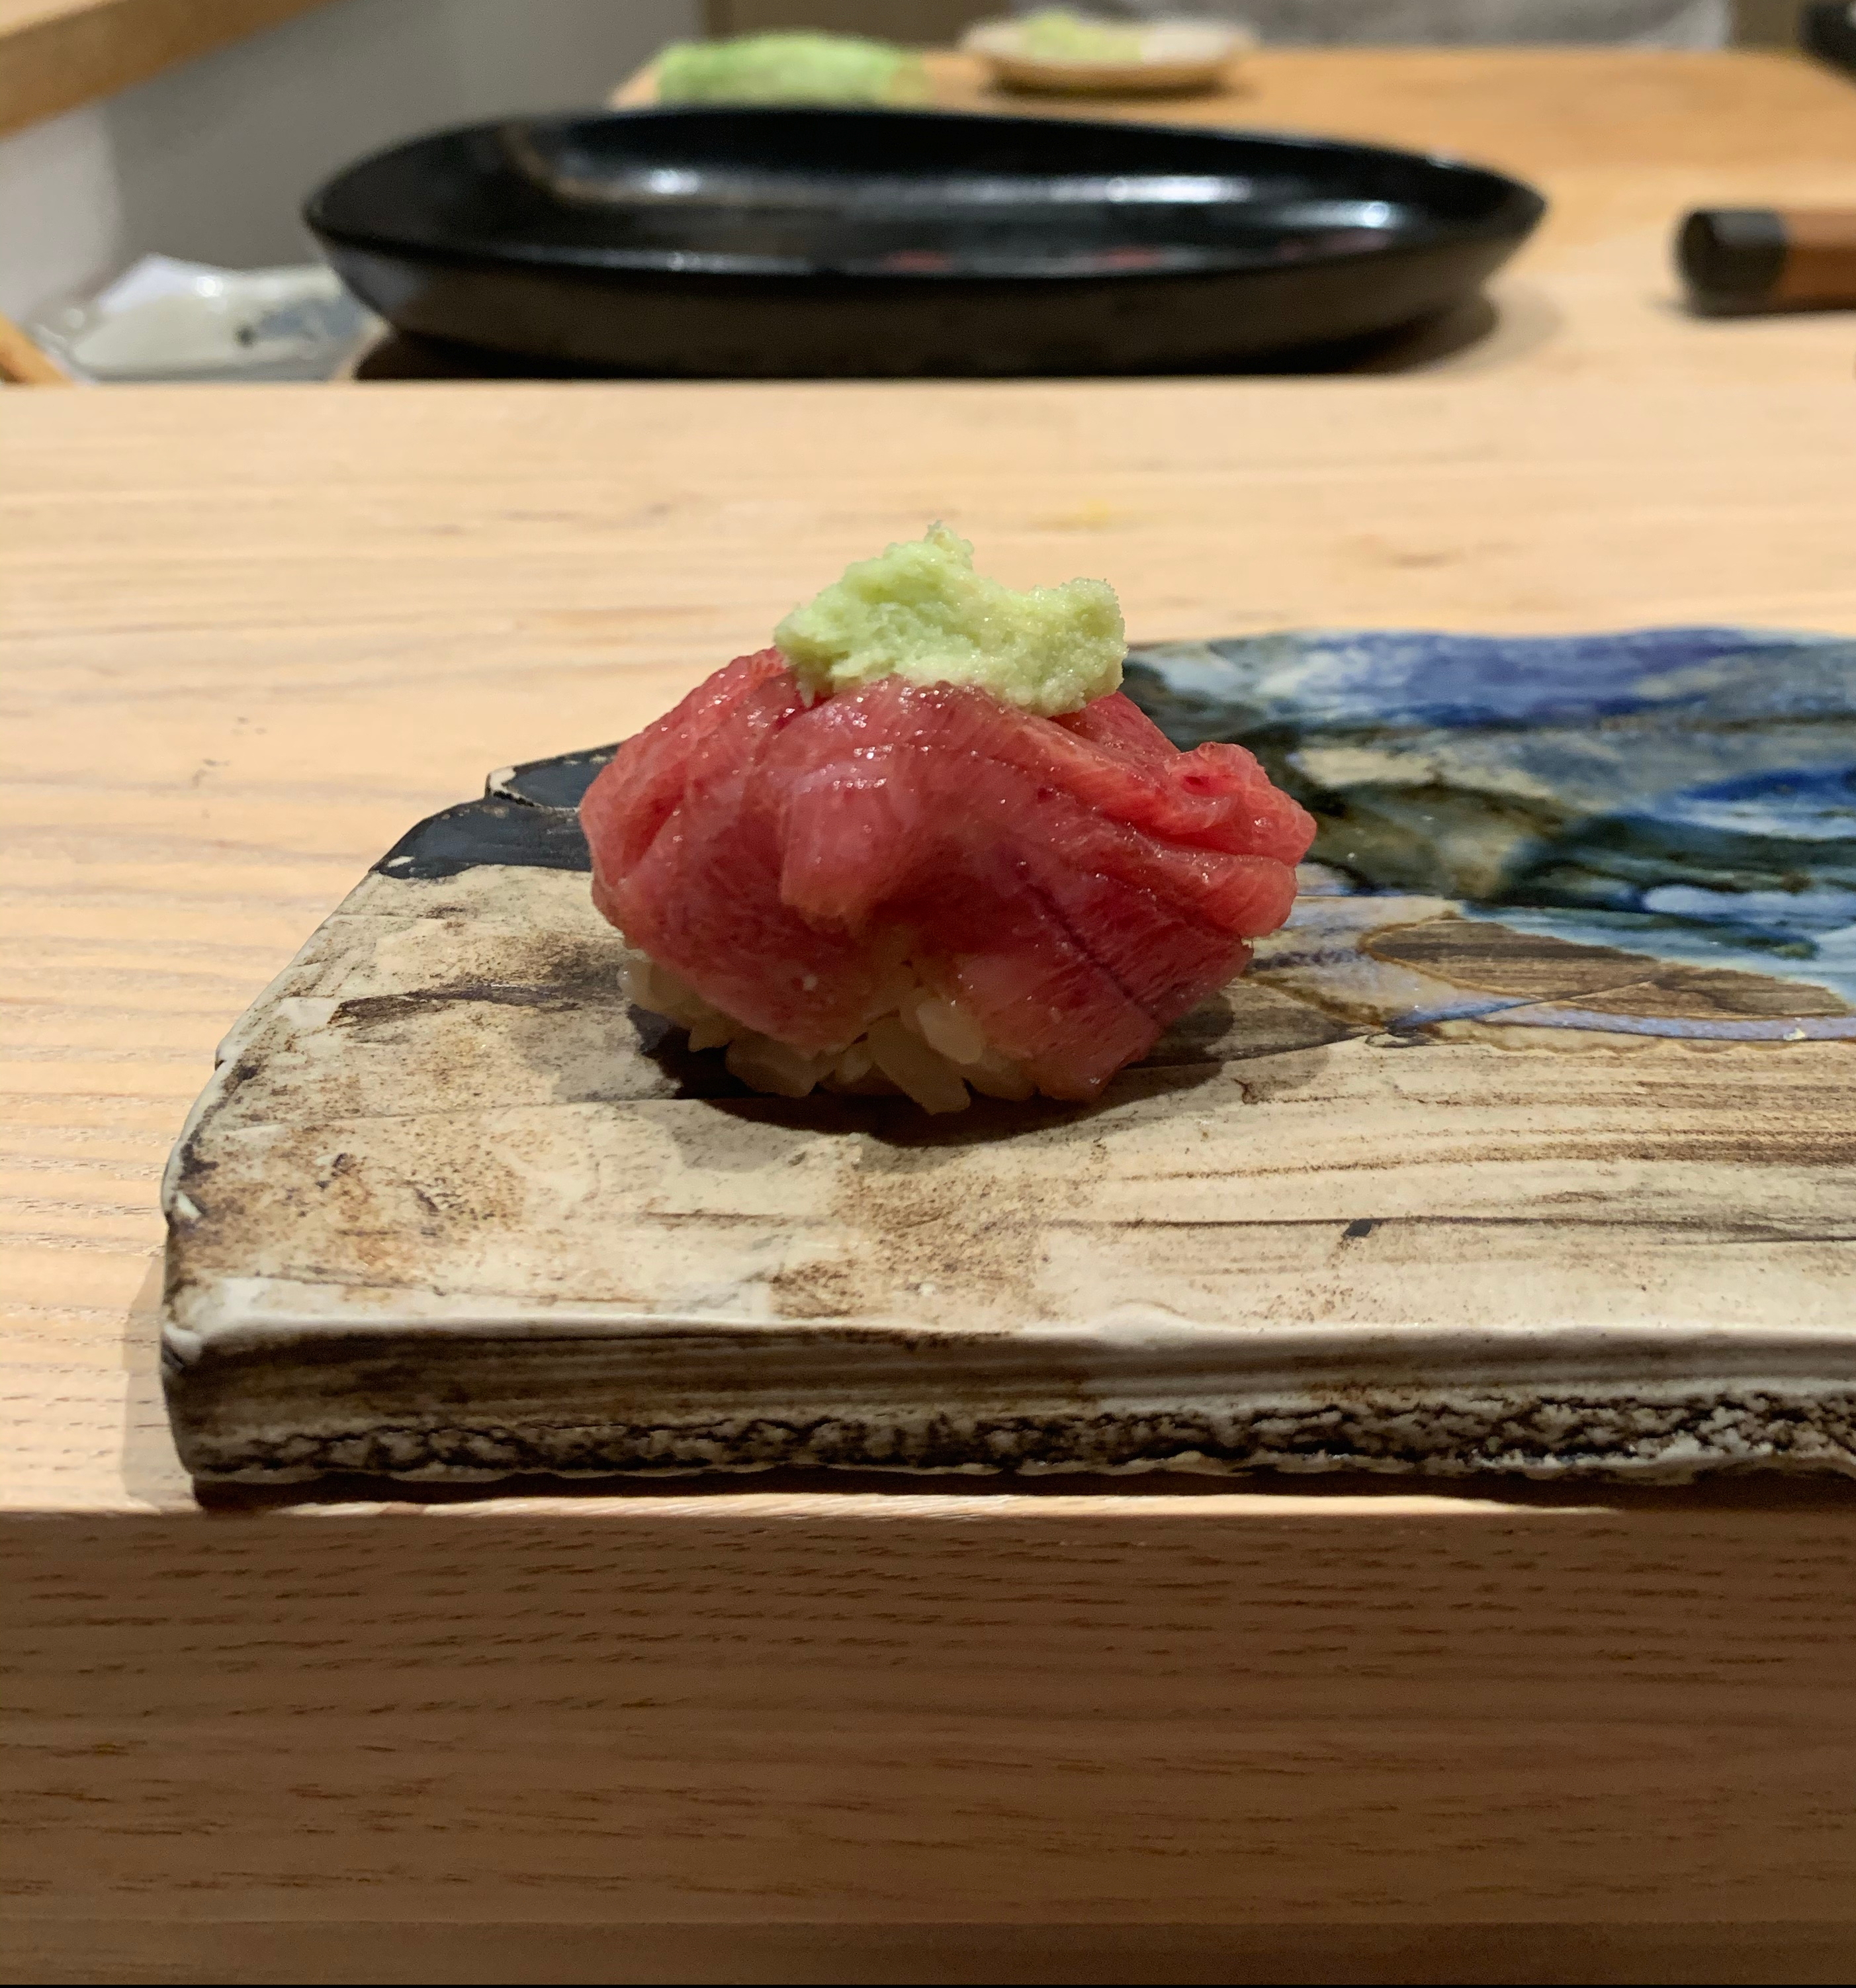 A single piece of nigiri sushi with a red fish on top. The fish has a dollop of pale green wasabi on top of it.